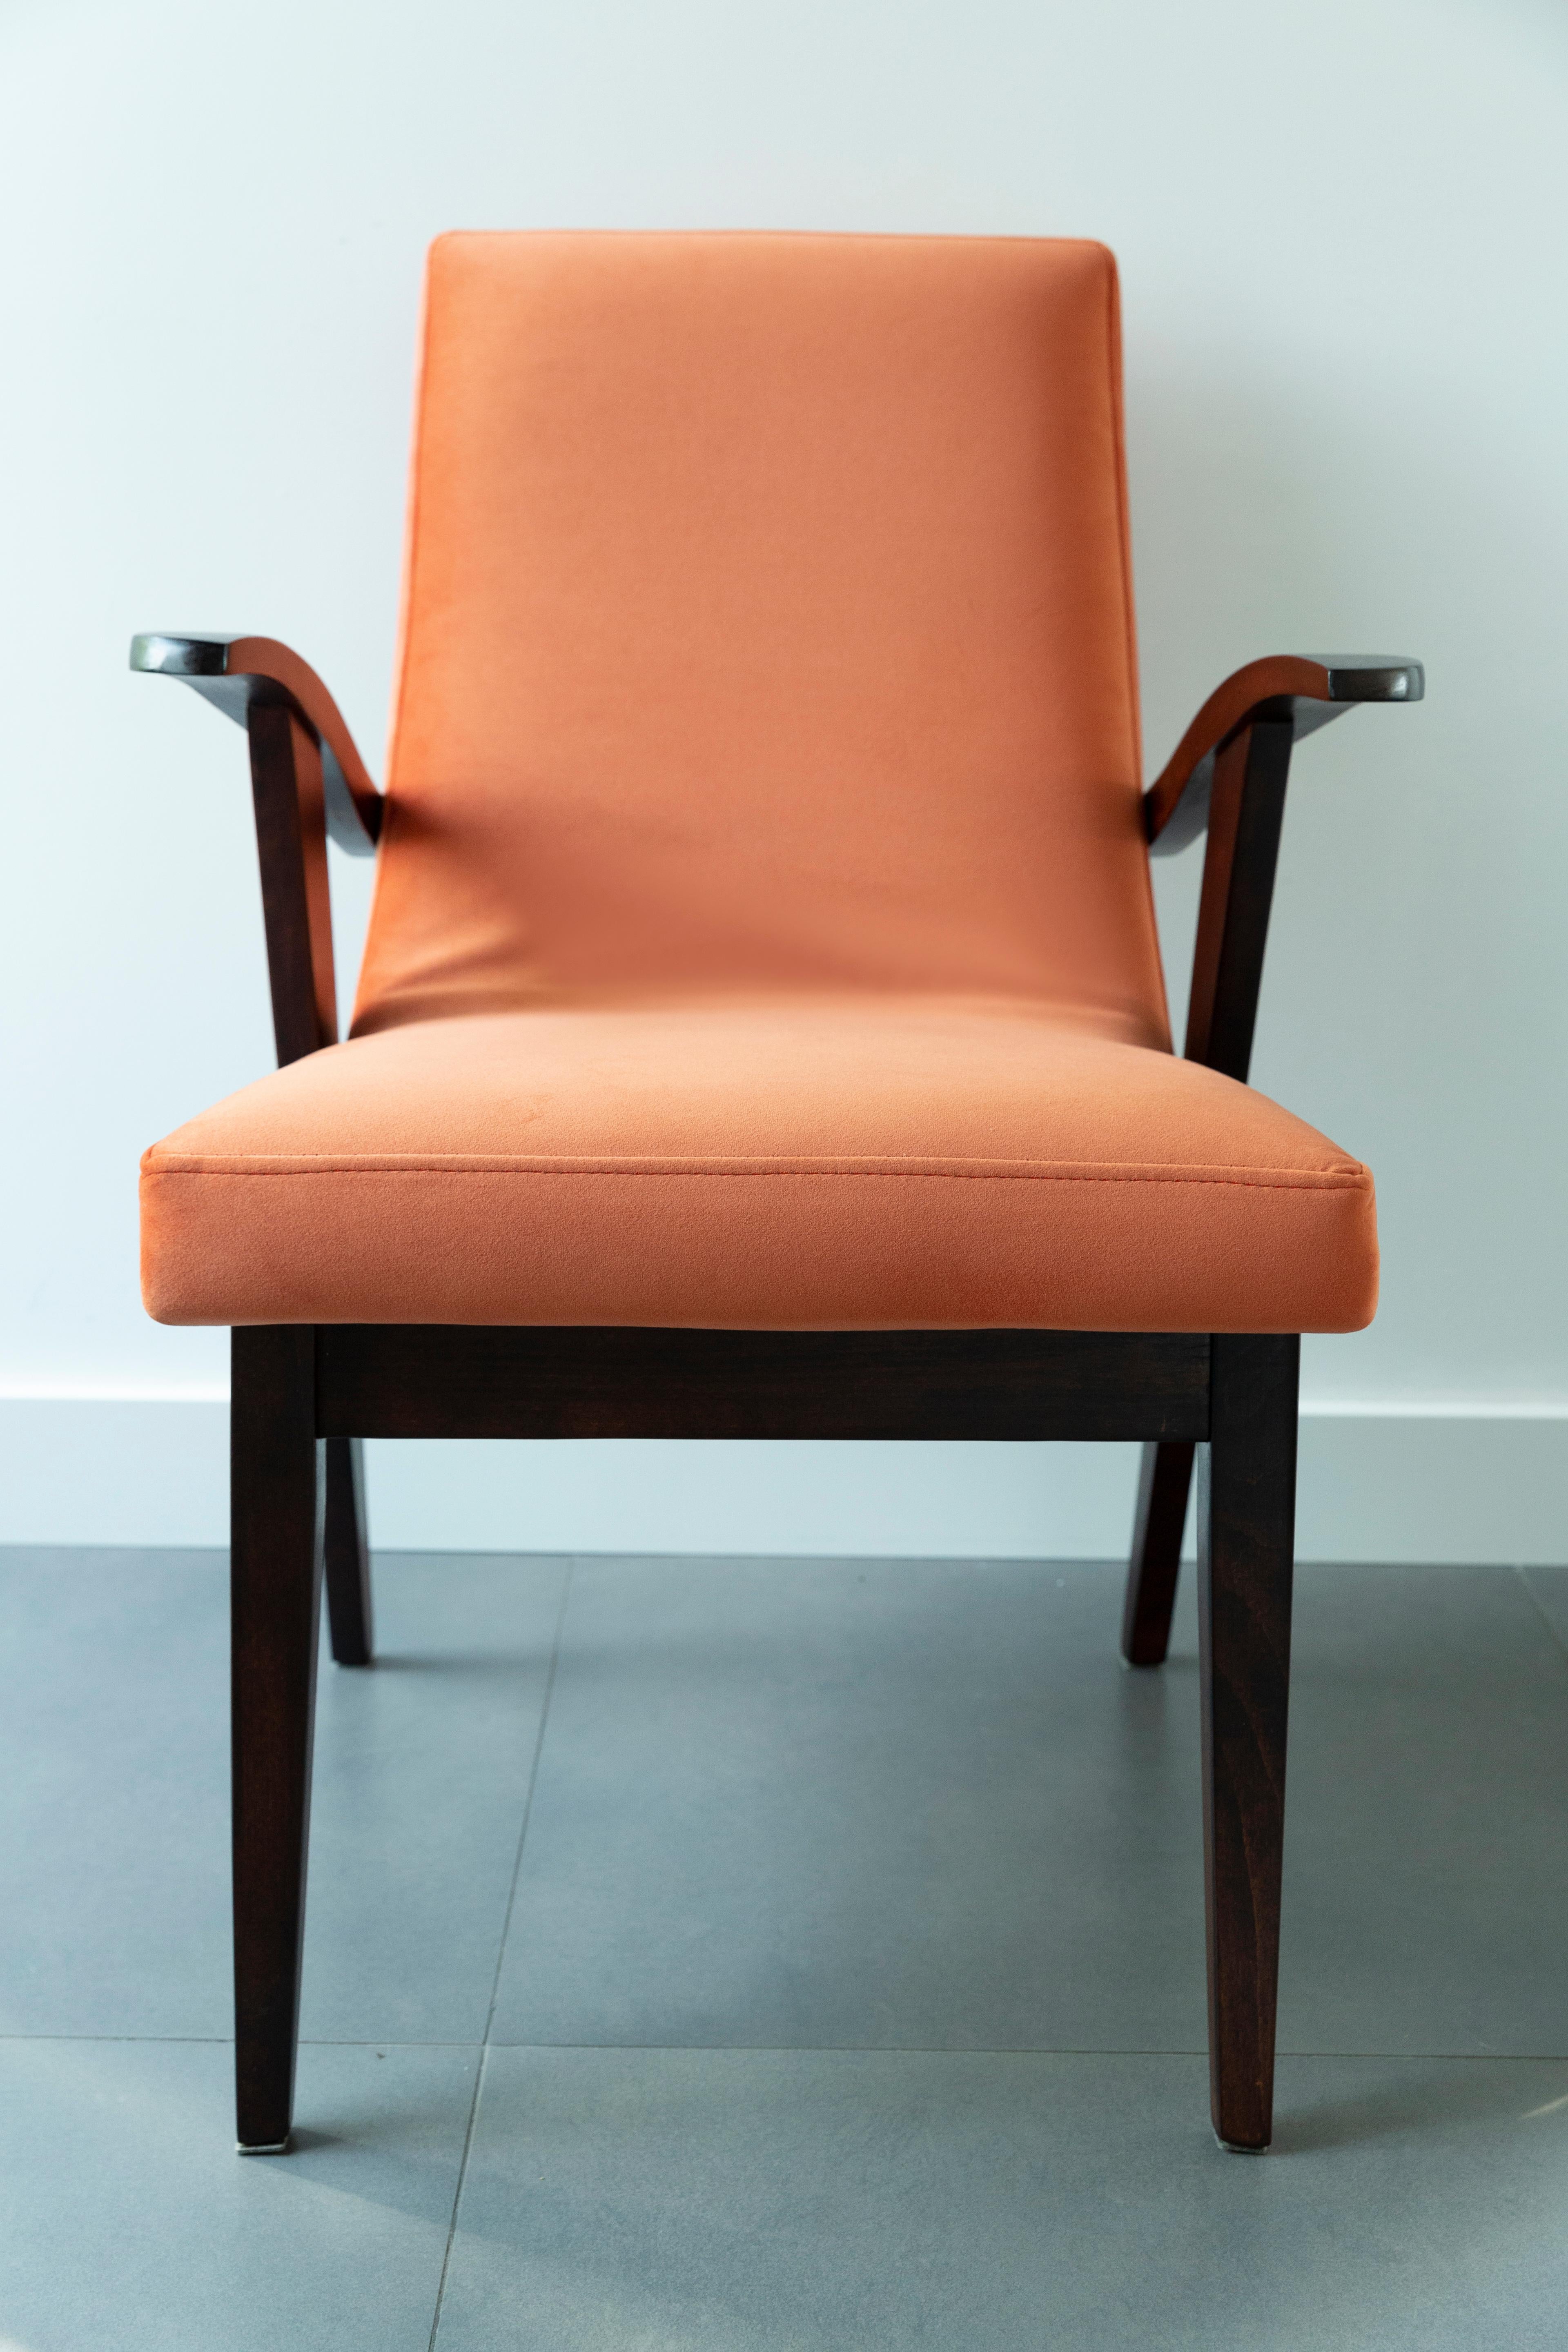 Set of Eight Vintage Chairs in Orange Velvet by Mieczyslaw Puchala, 1960s For Sale 3